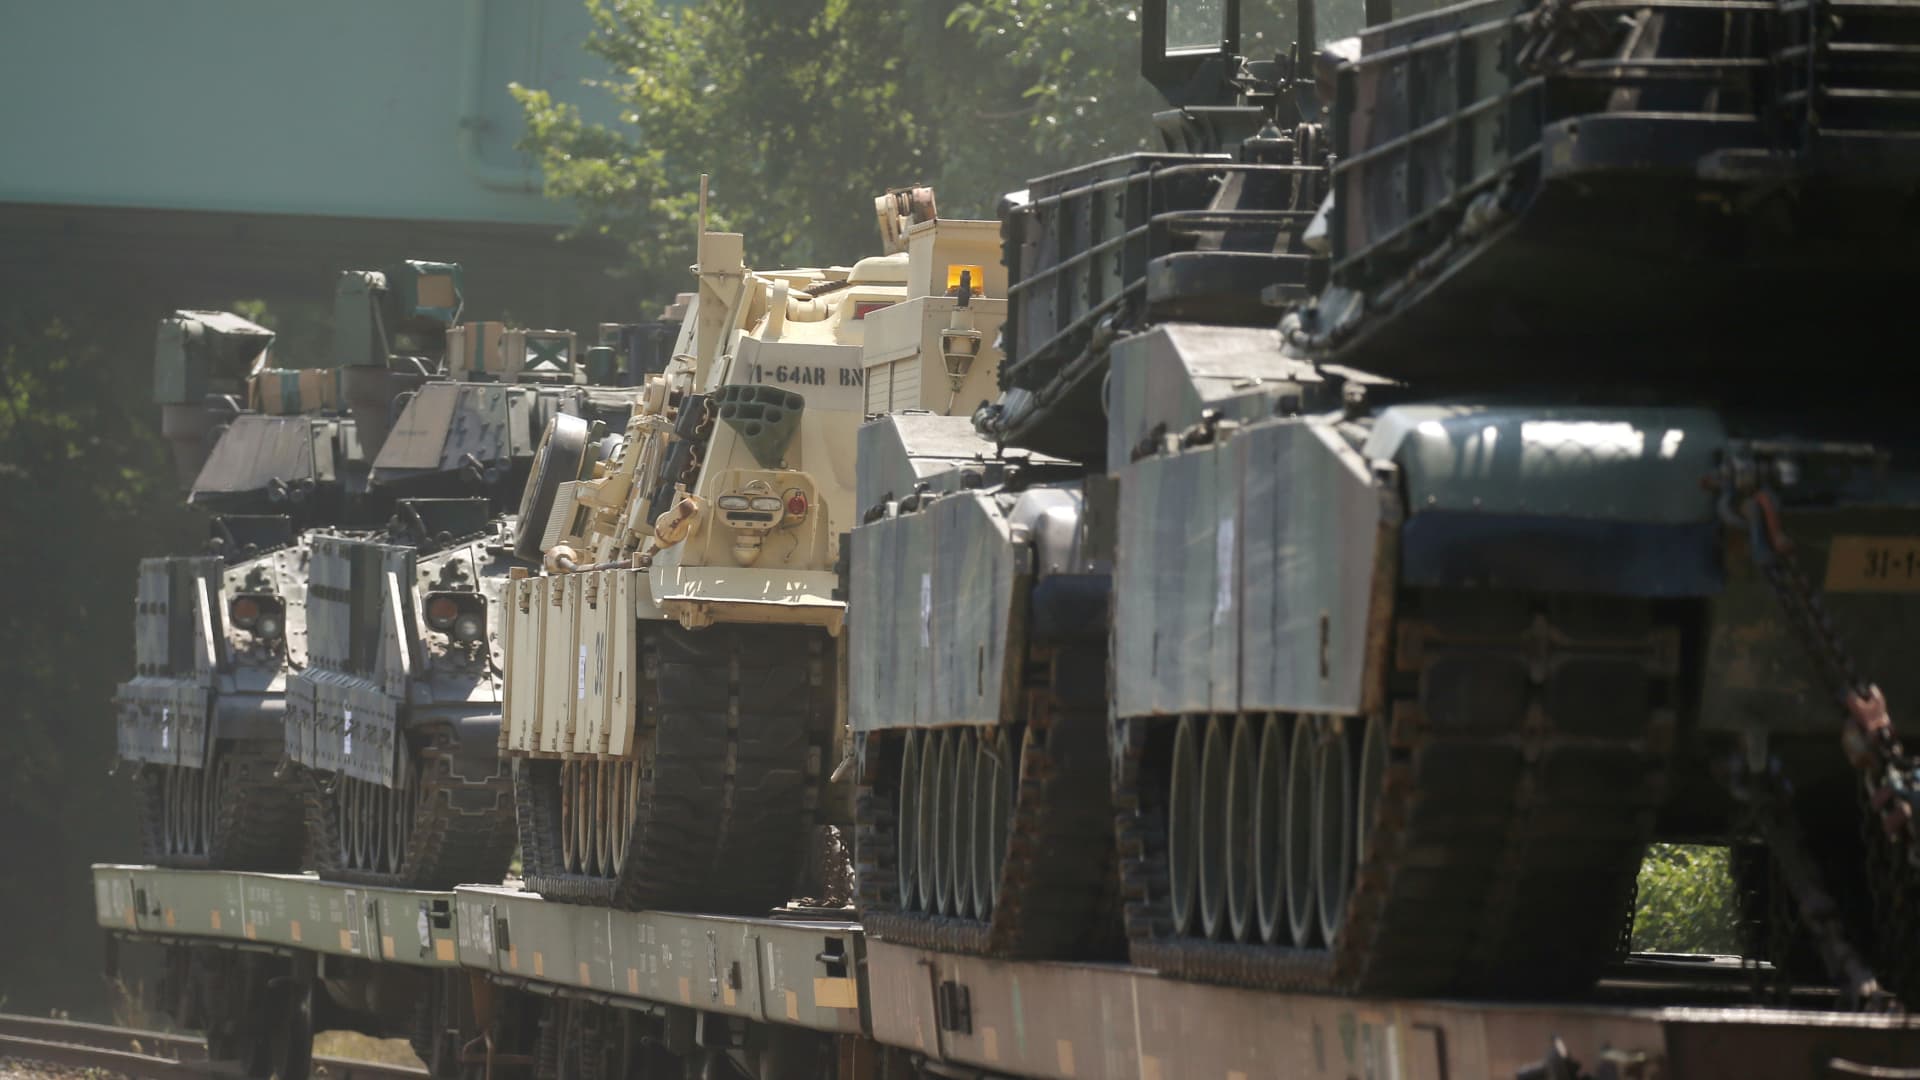 M1 Abrams tanks and other armored vehicles sit atop flat cars in a rail yard after U.S. President Donald Trump said tanks and other military hardware would be part of Fourth of July displays of military prowess in Washington, U.S., July 2, 2019. 